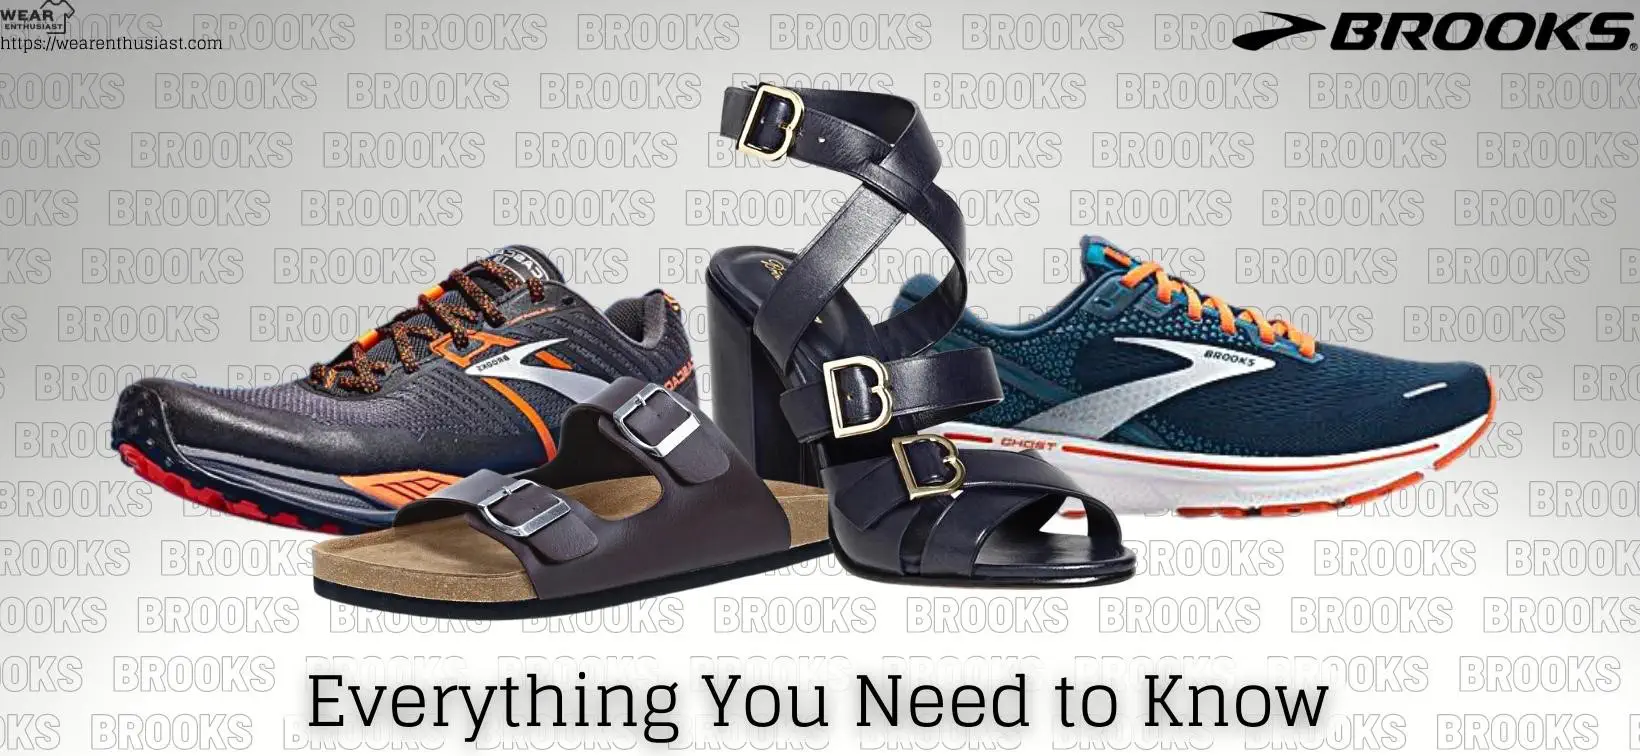 Brooks Everything You Need to Know